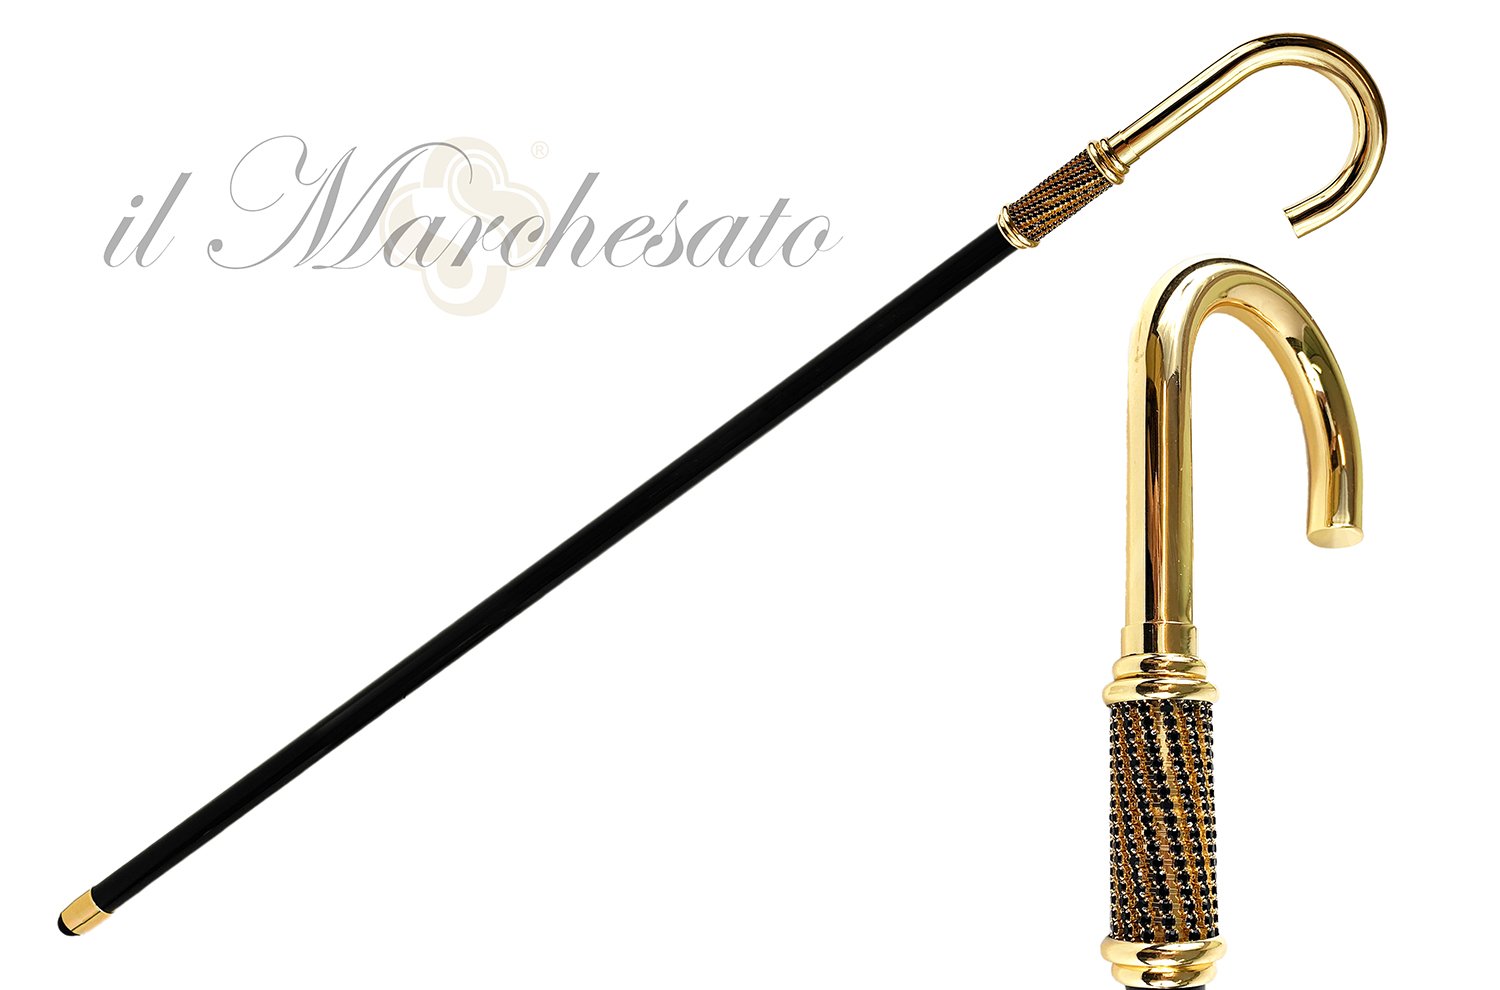 Luxury Walking stick for Men - IL MARCHESATO LUXURY UMBRELLAS, CANES AND SHOEHORNS